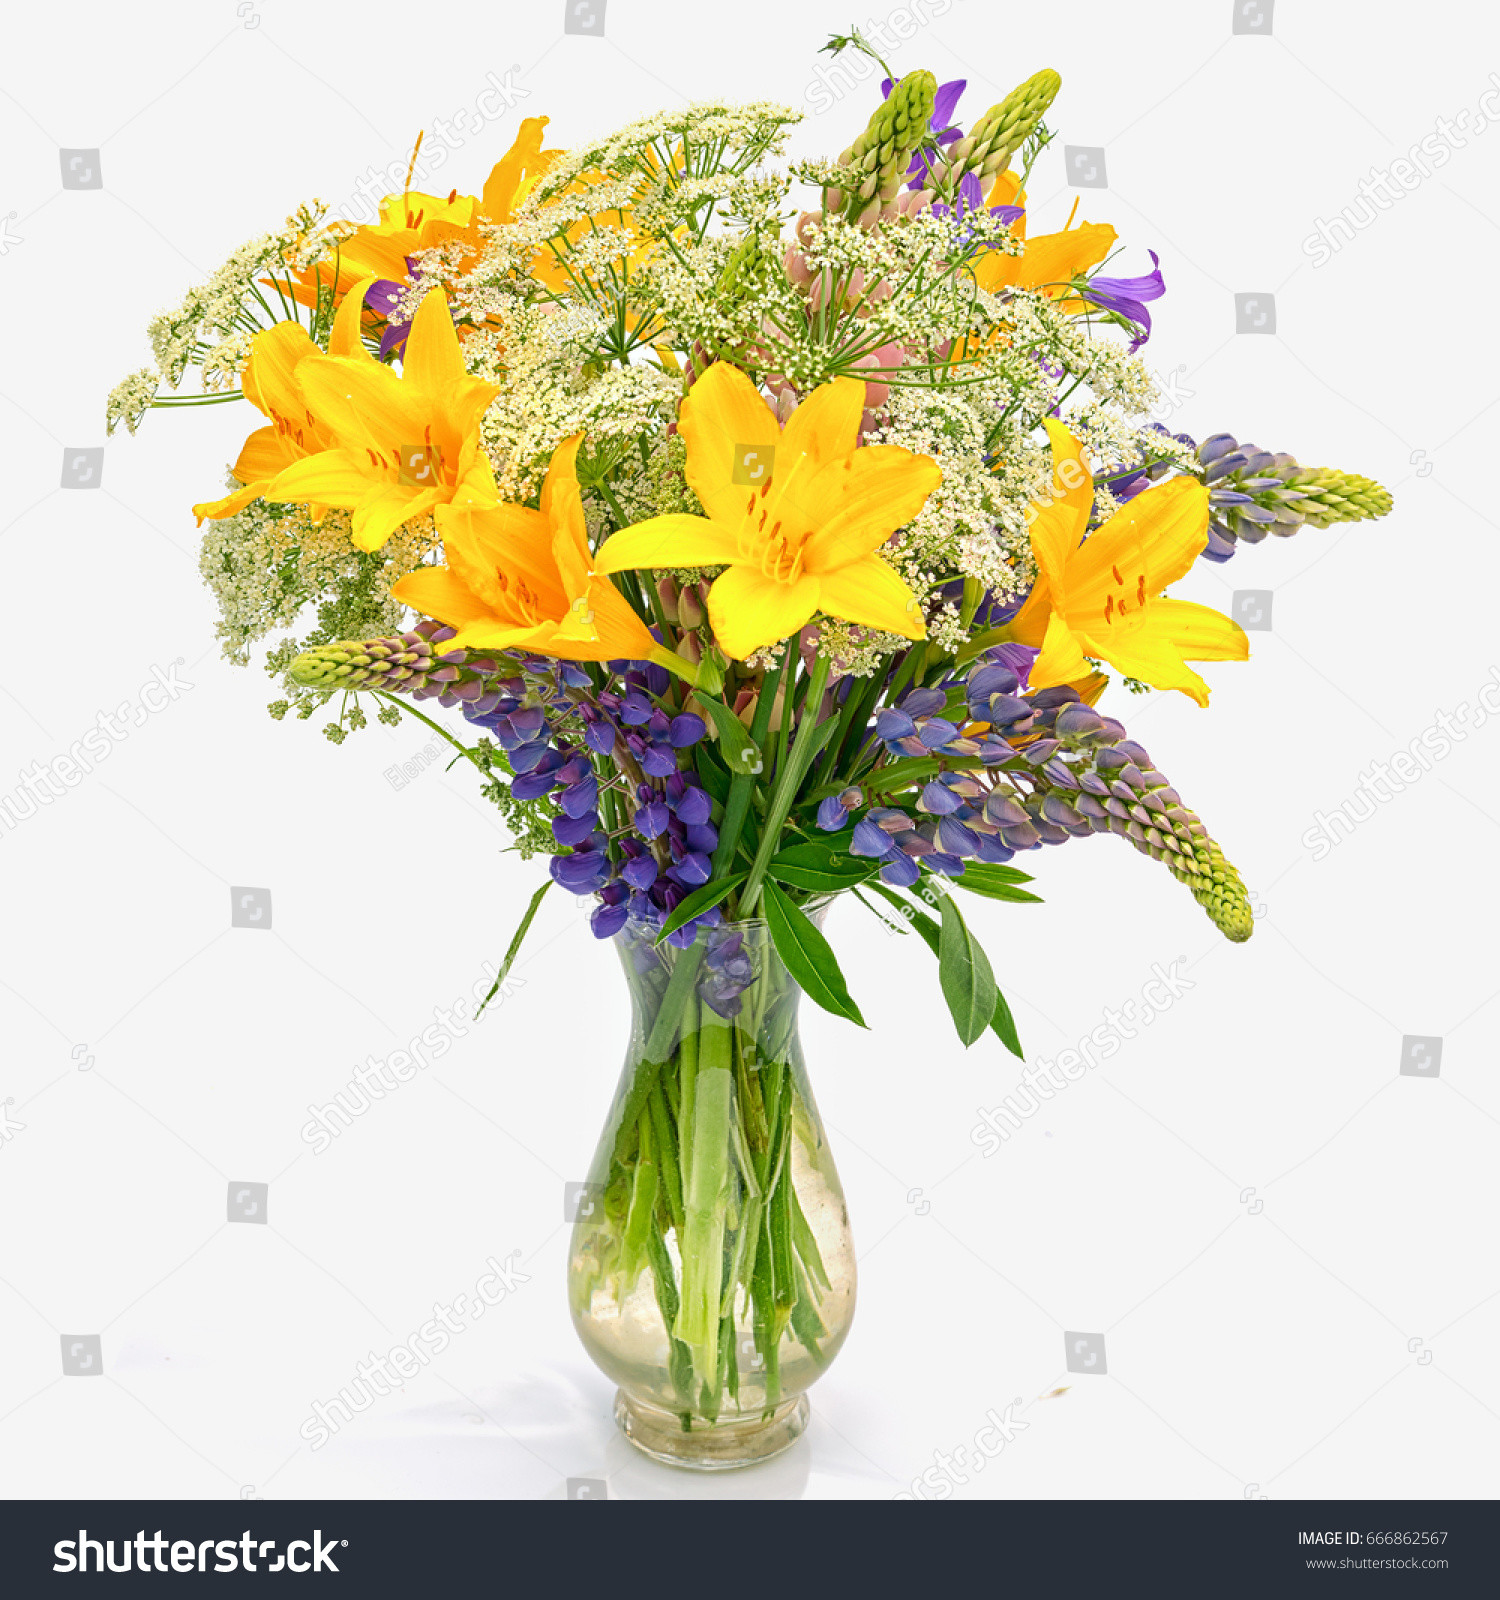 17 attractive Big Clear Glass Vase 2024 free download big clear glass vase of bouquet od wild flowers achillea millefolium stock photo edit now in bouquet od wild flowers achillea millefolium day lily and lupine in a transparent glass